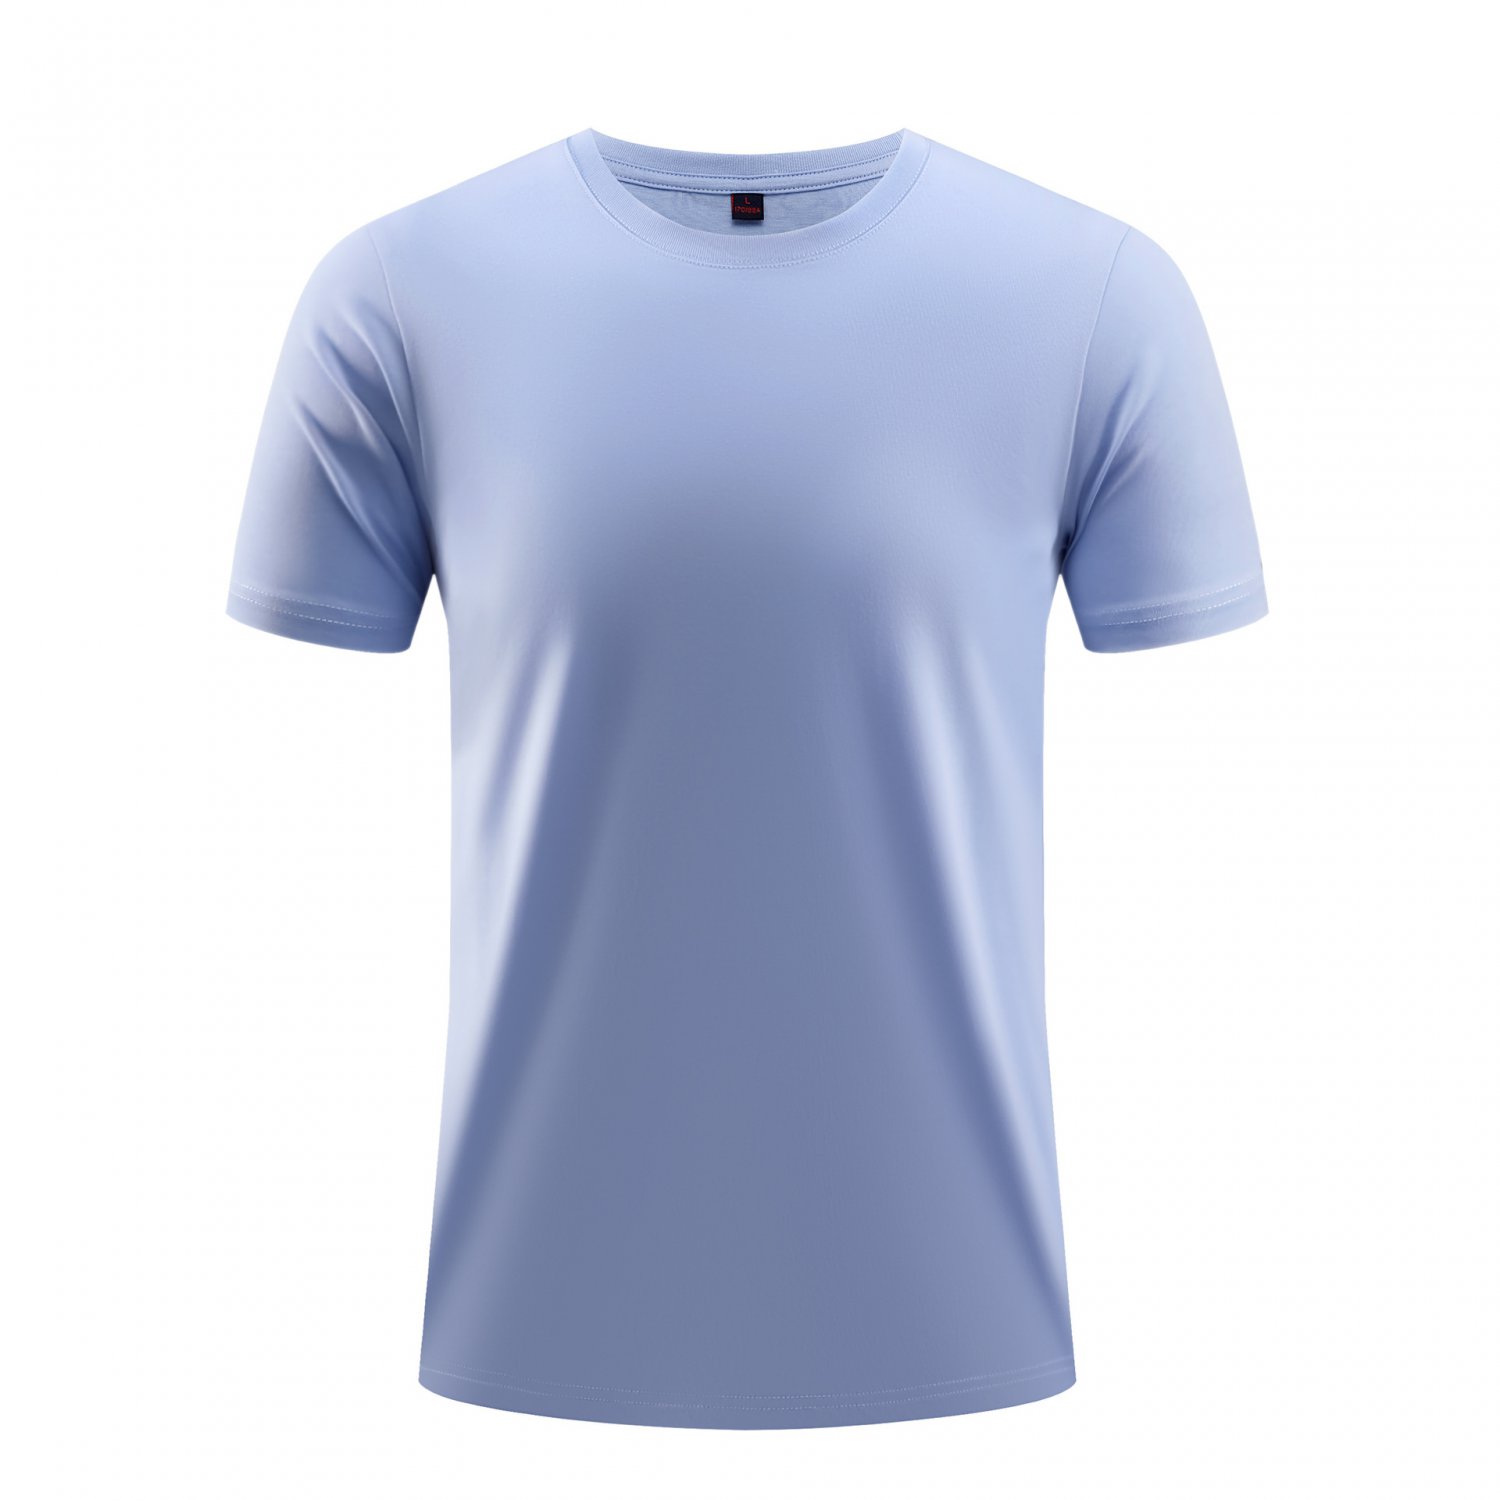 Breathable Refreshing Cotton Short Sleeve T-Shirt Seawater Blue